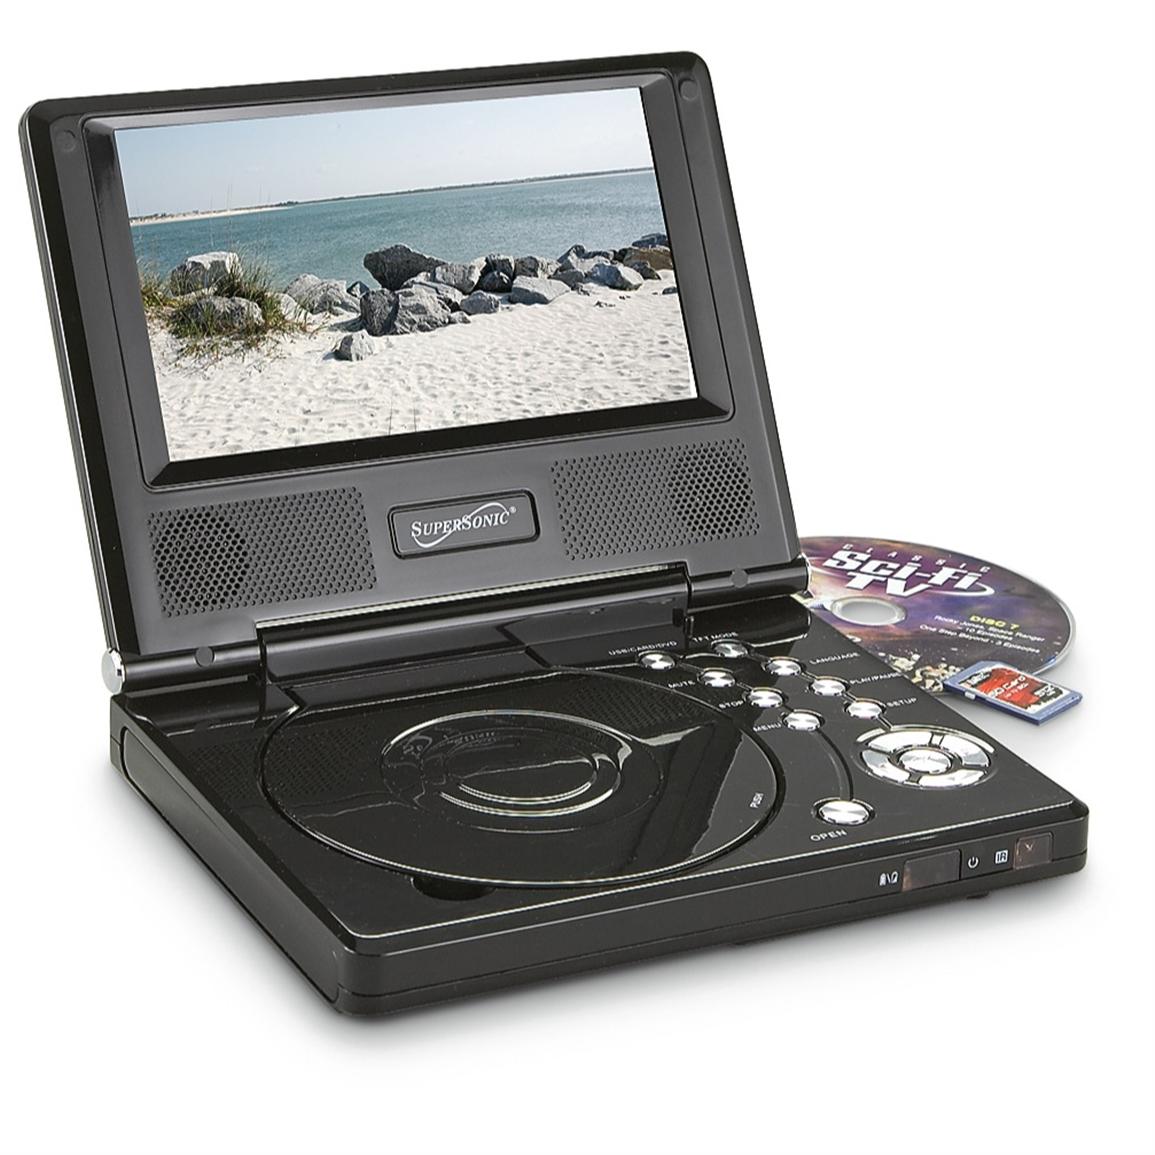 SuperSonic® 7 inch Portable DVD Player